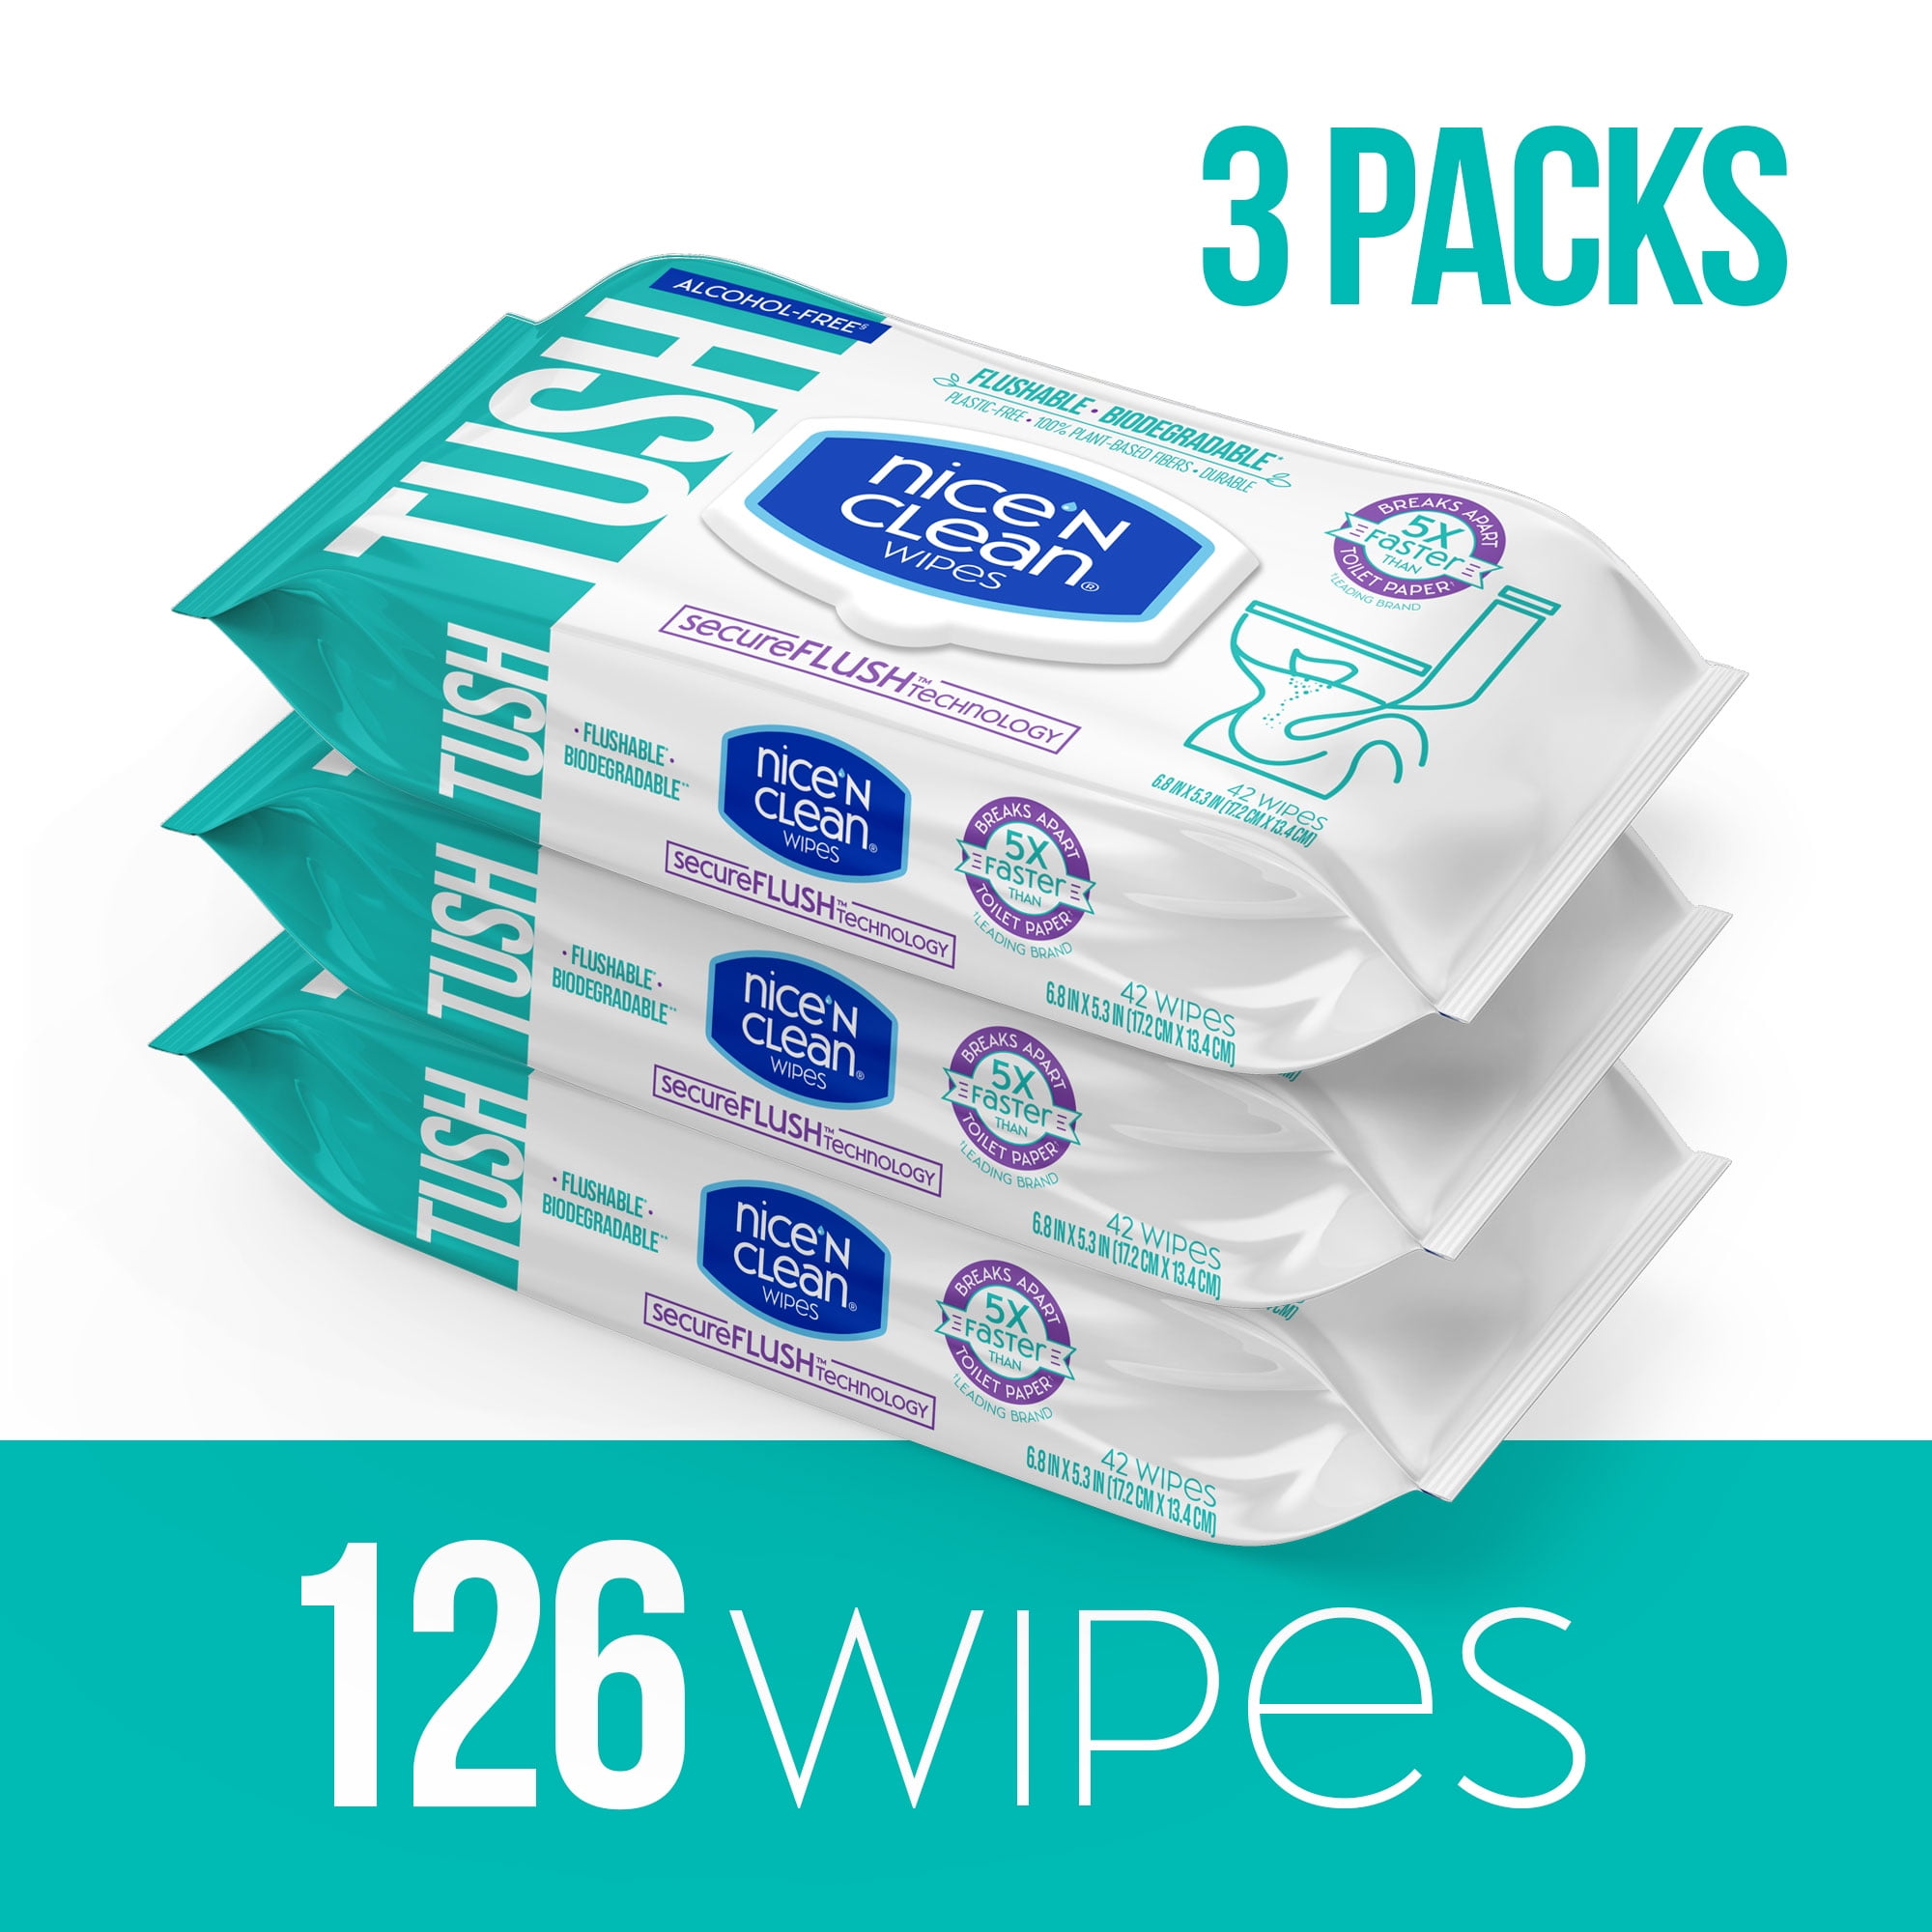 Nice ’N CLEAN® Wipes Nice 'N CLEAN SecureFLUSH Biodegradable Alcohol Free Flushable Wipes, Gentle for Sensitive Skin, 3 Flip-Top Packs (126 Total Wipes)